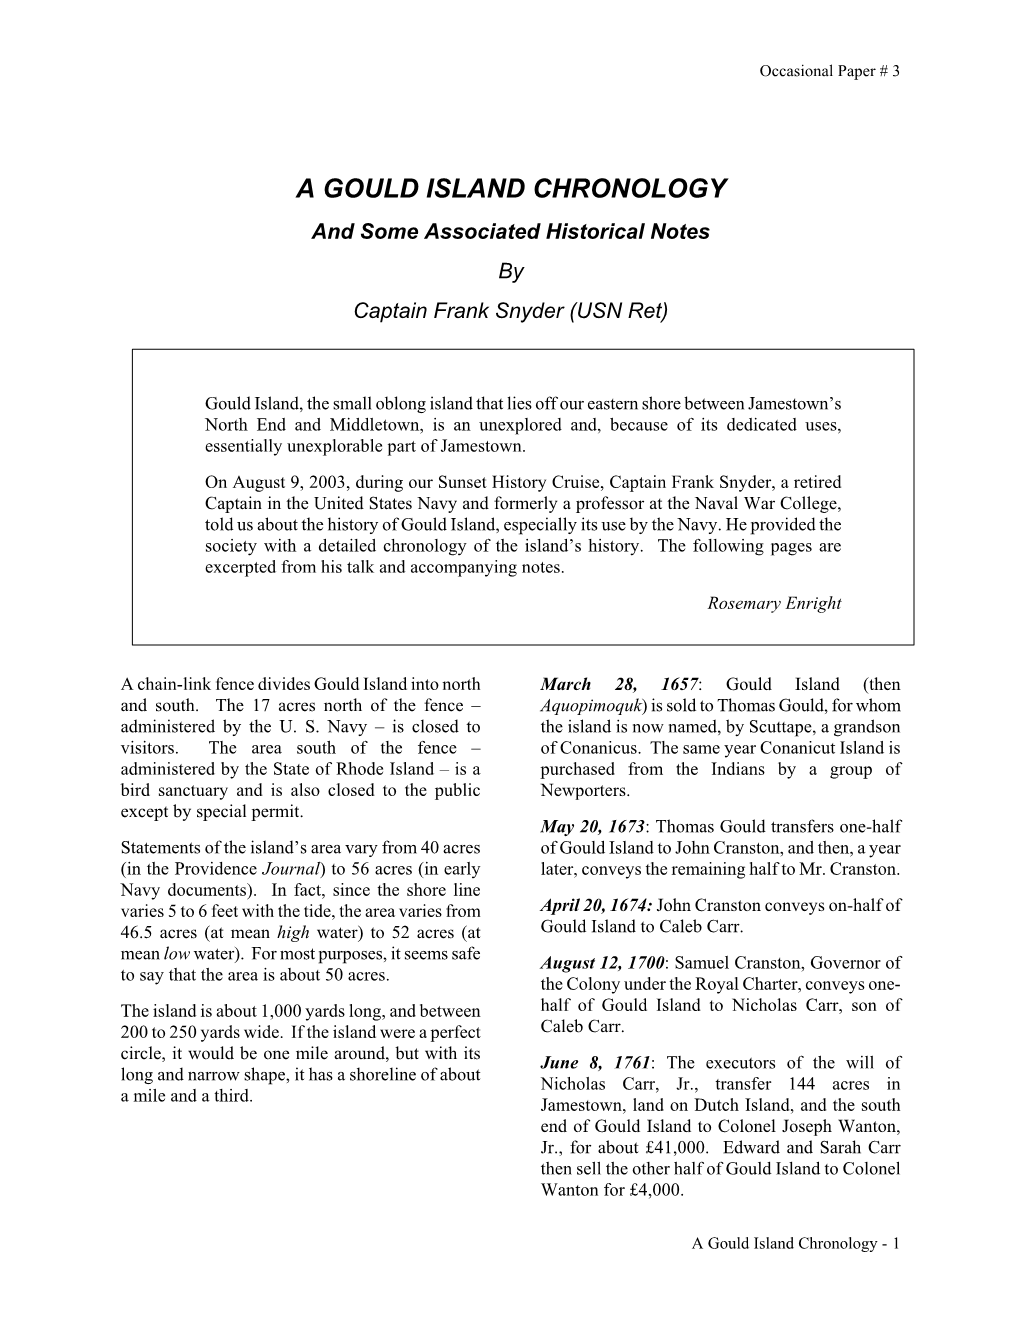 A GOULD ISLAND CHRONOLOGY and Some Associated Historical Notes by Captain Frank Snyder (USN Ret)